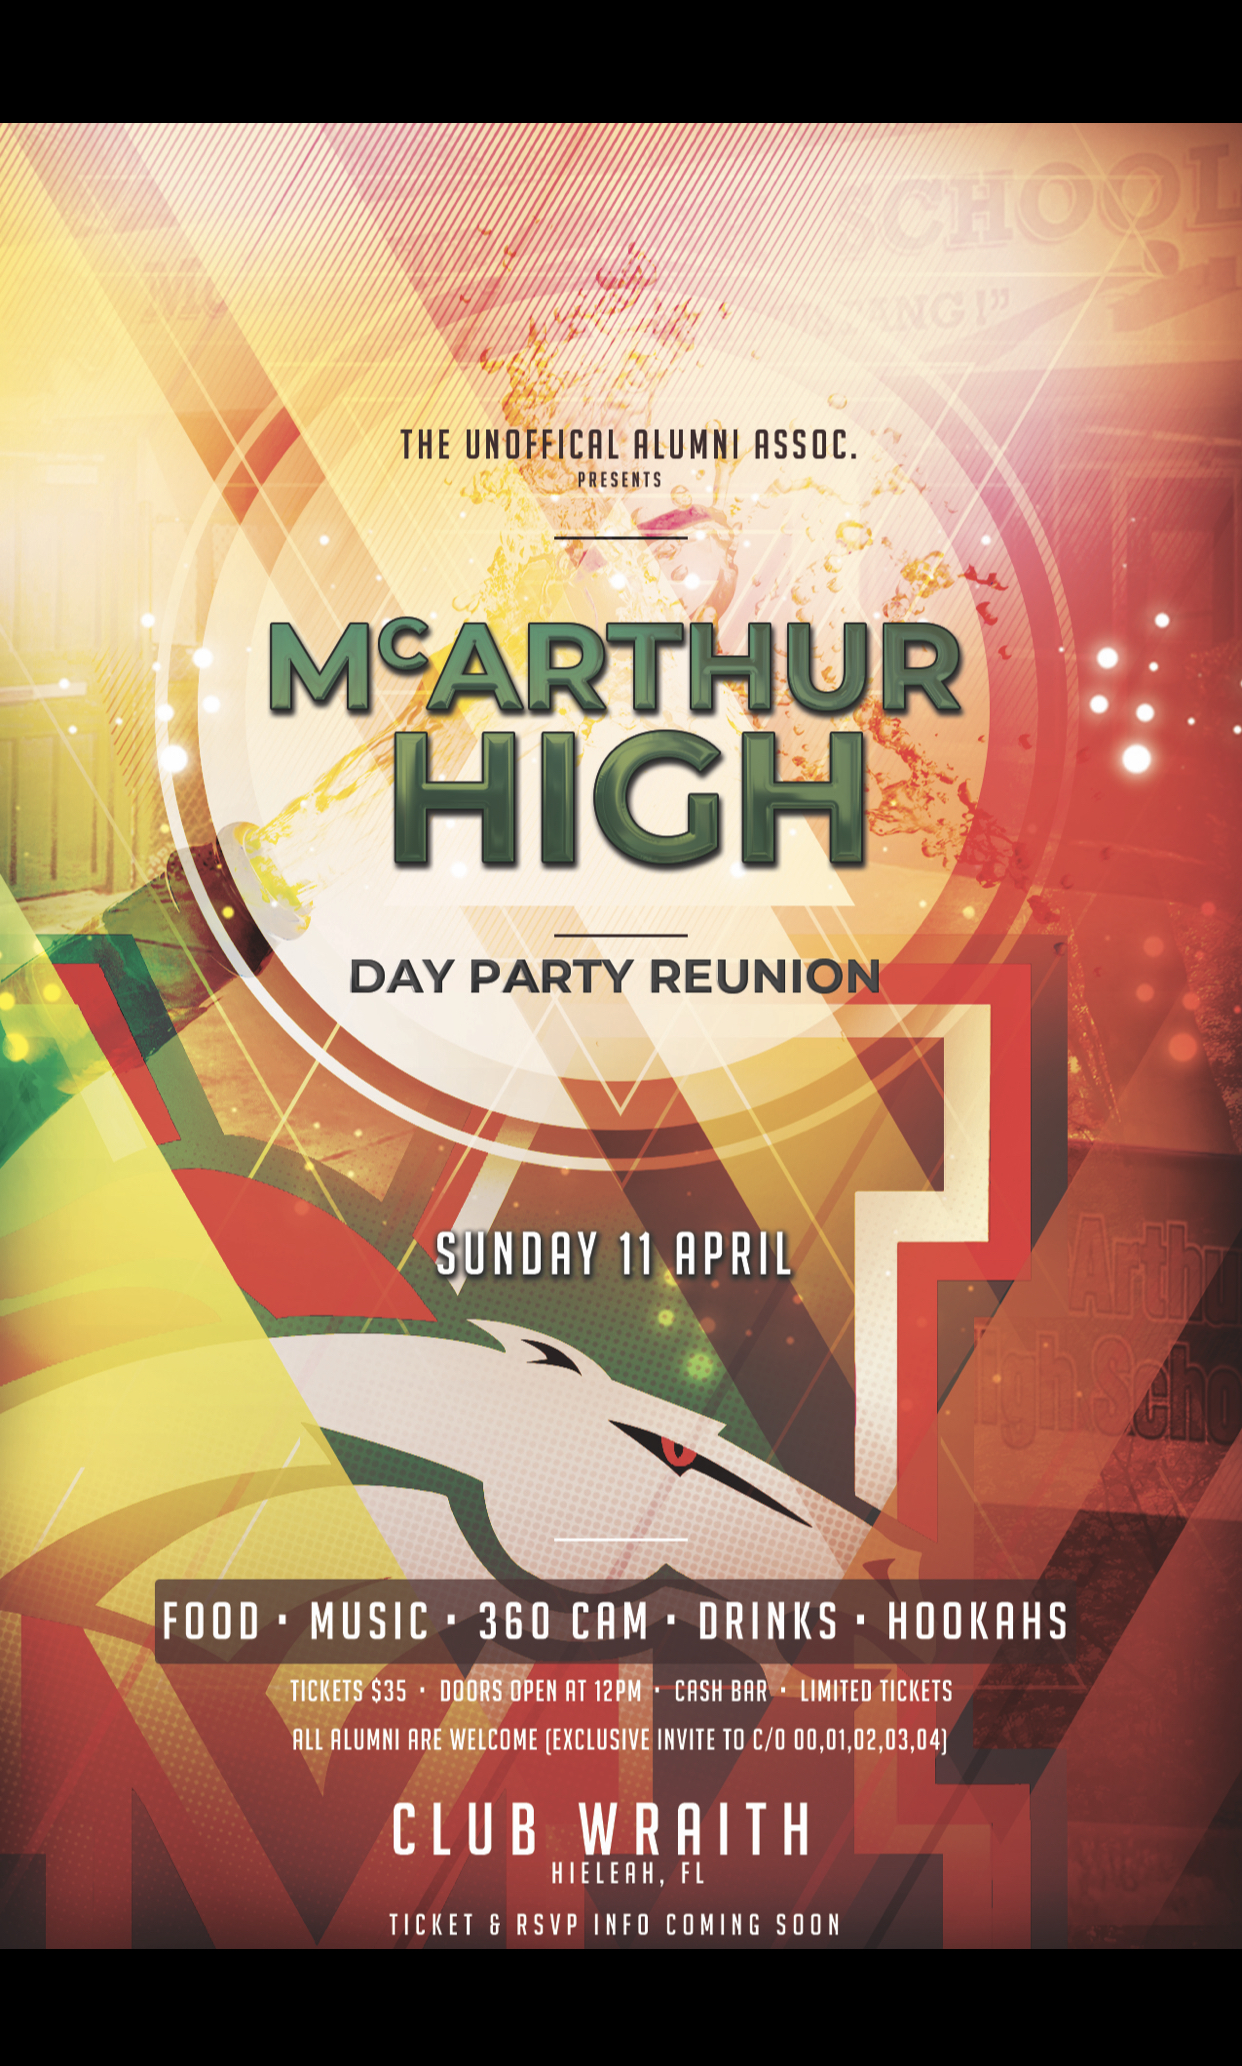 MCARTHUR DAY PARTY